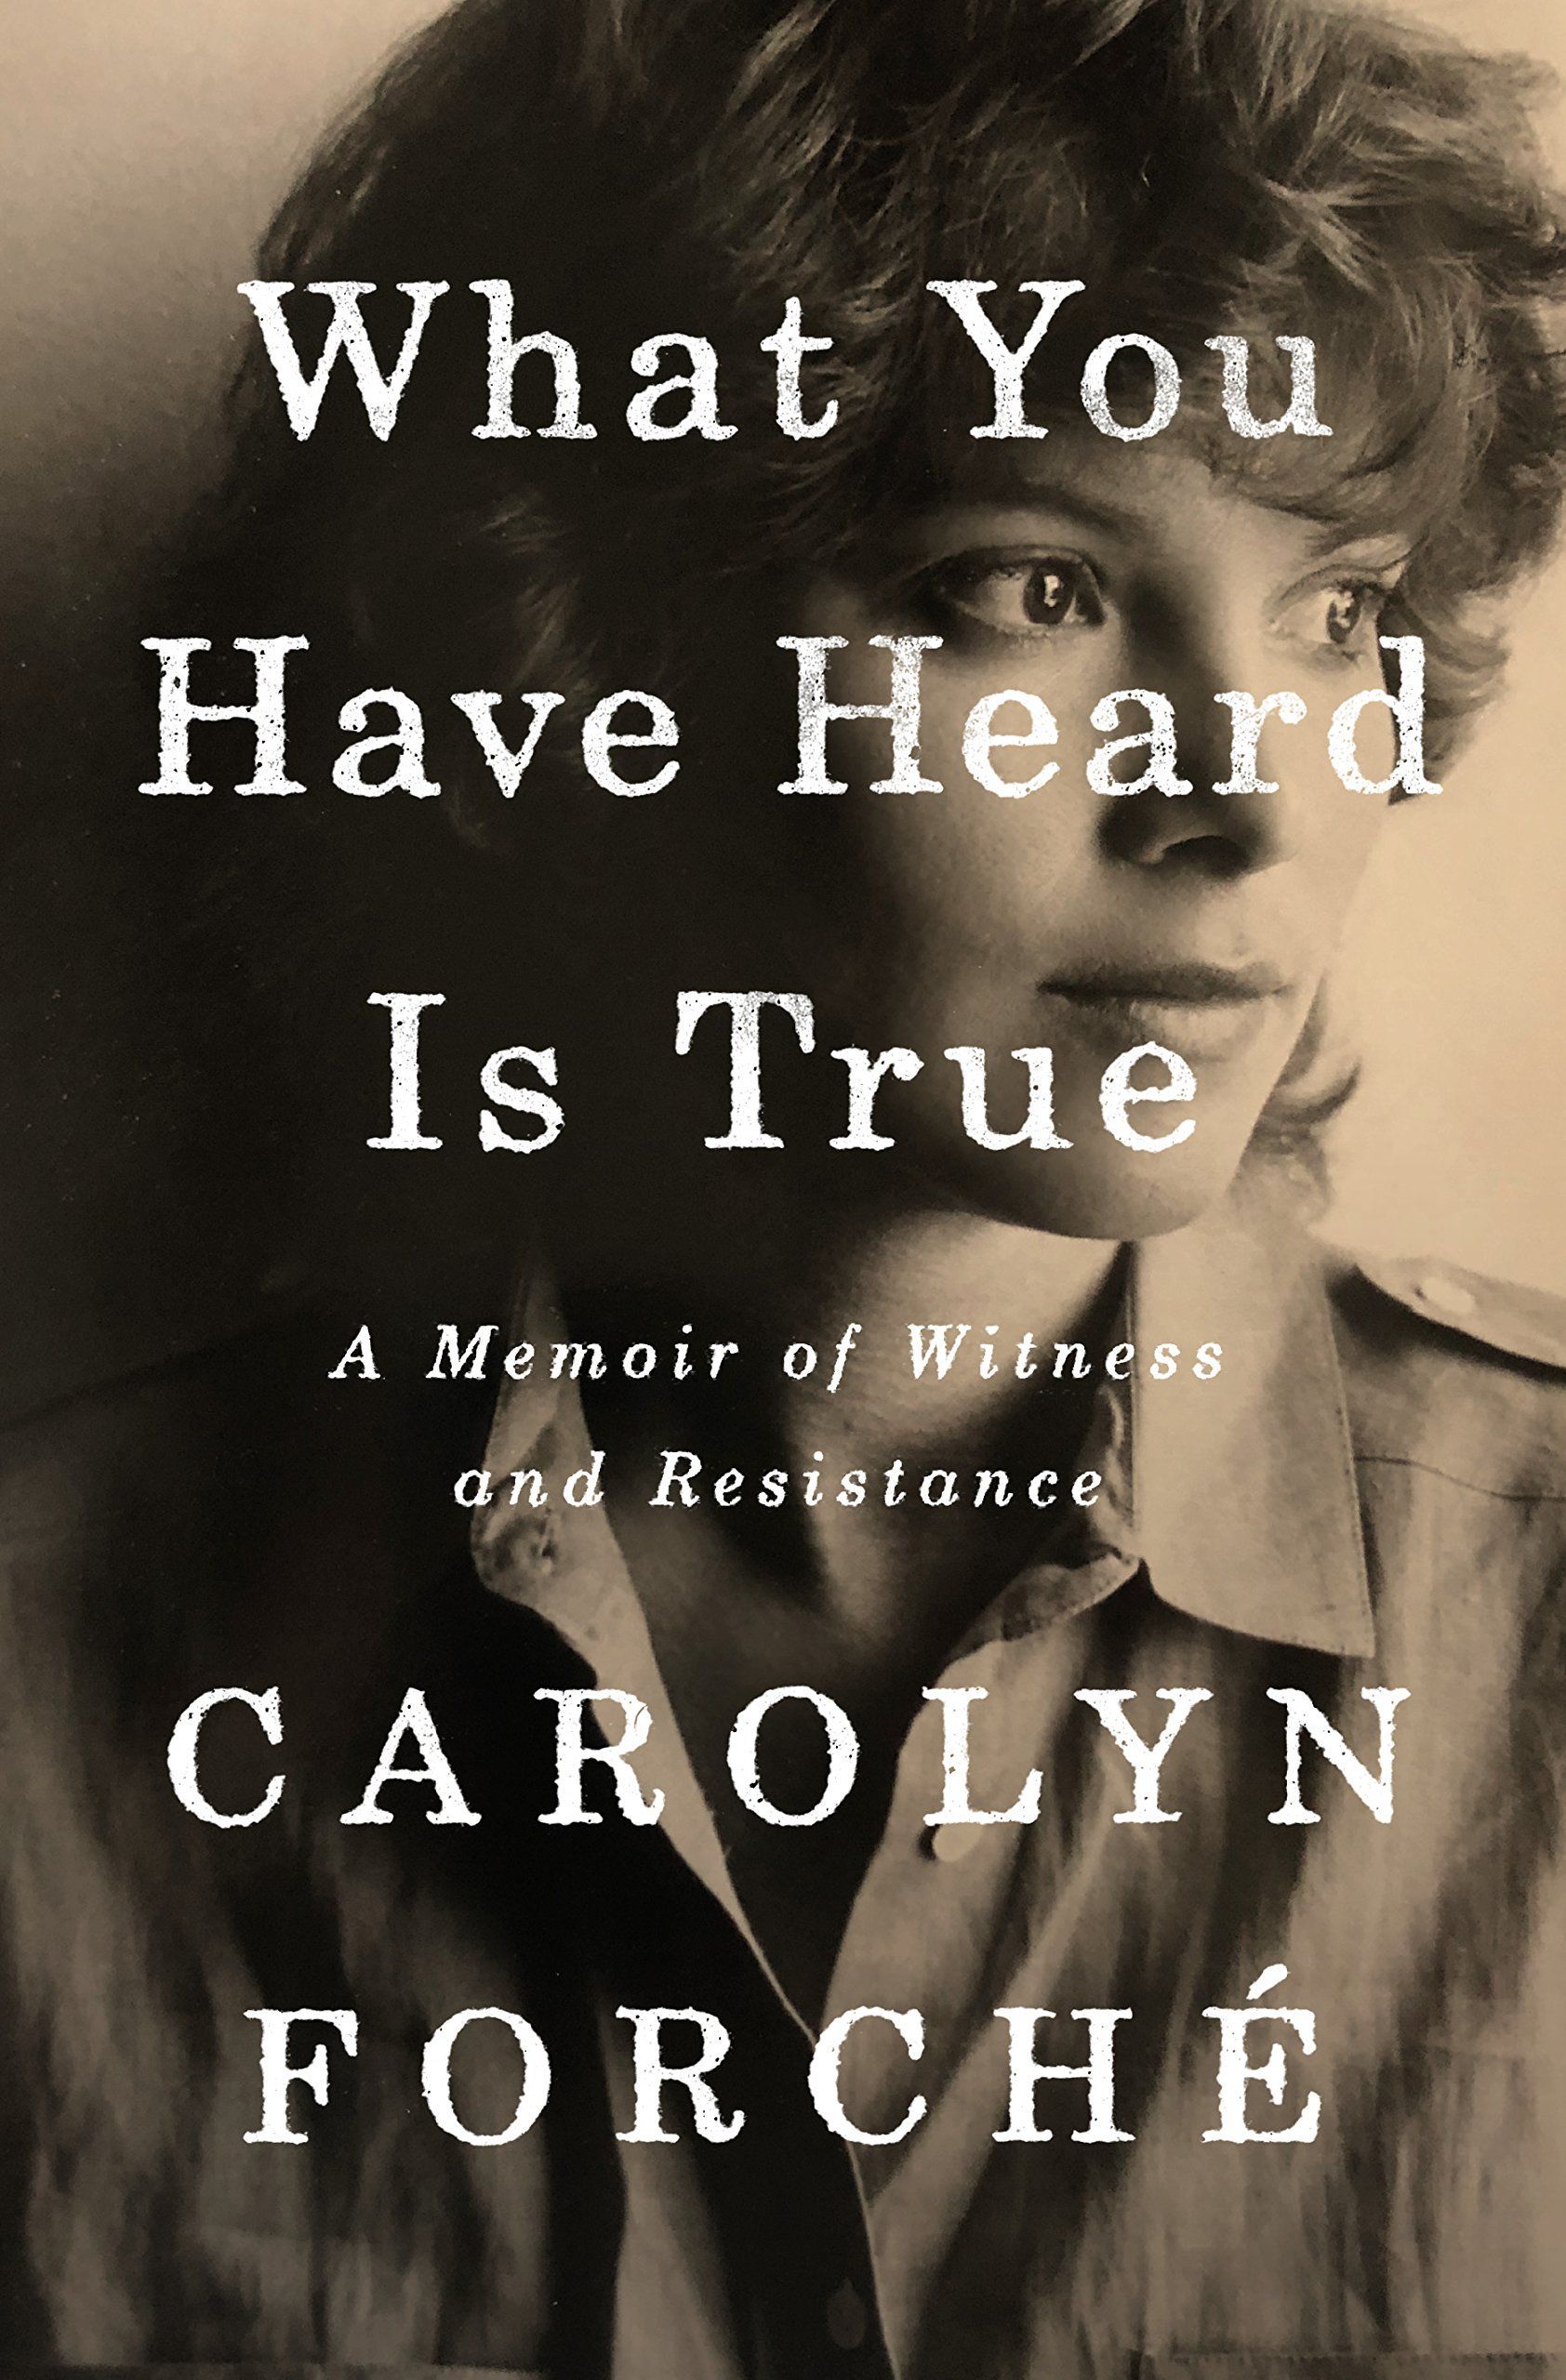 Pay Attention: On Carolyn Forché’s “What You Have Heard Is True”